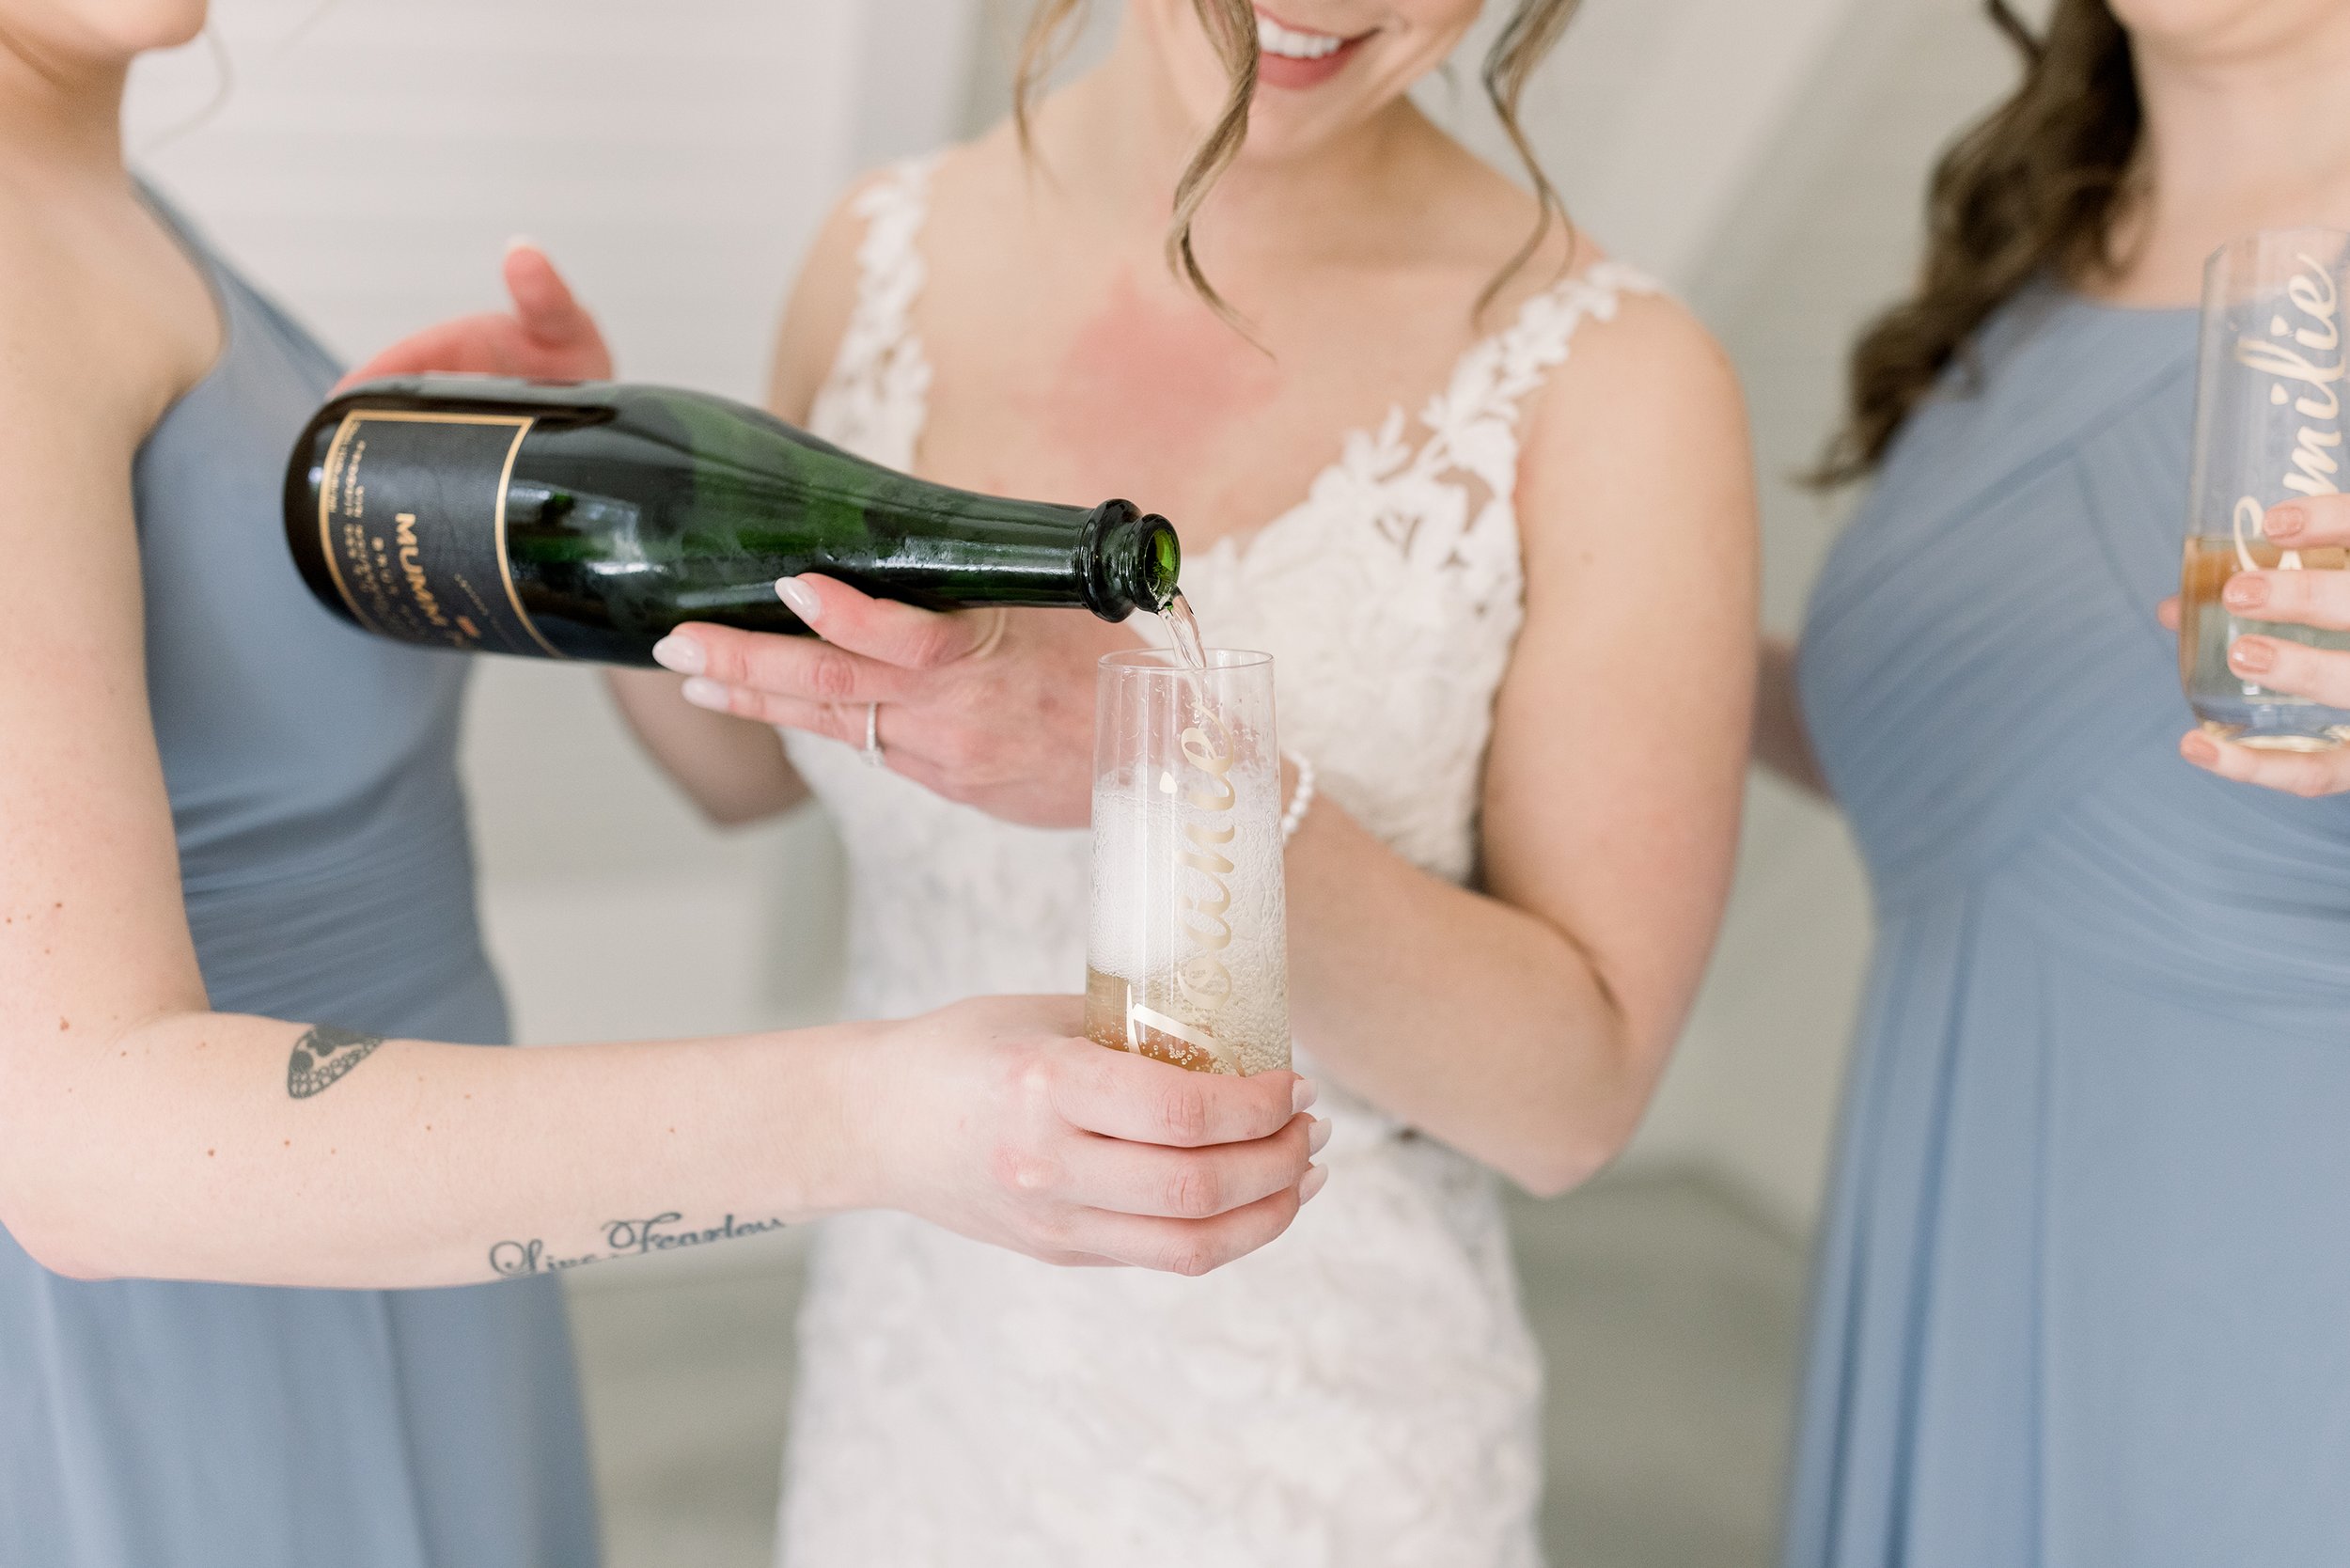  The bride pours champagne for her bridesmaids on her wedding day by Chelsea Mason Photography. celebrate wedding day #ChelseaMasonPhotography #ChelseaMasonWeddings #WakefieldWeddings #LeBelvedere #Wakefieldweddingphotographers 